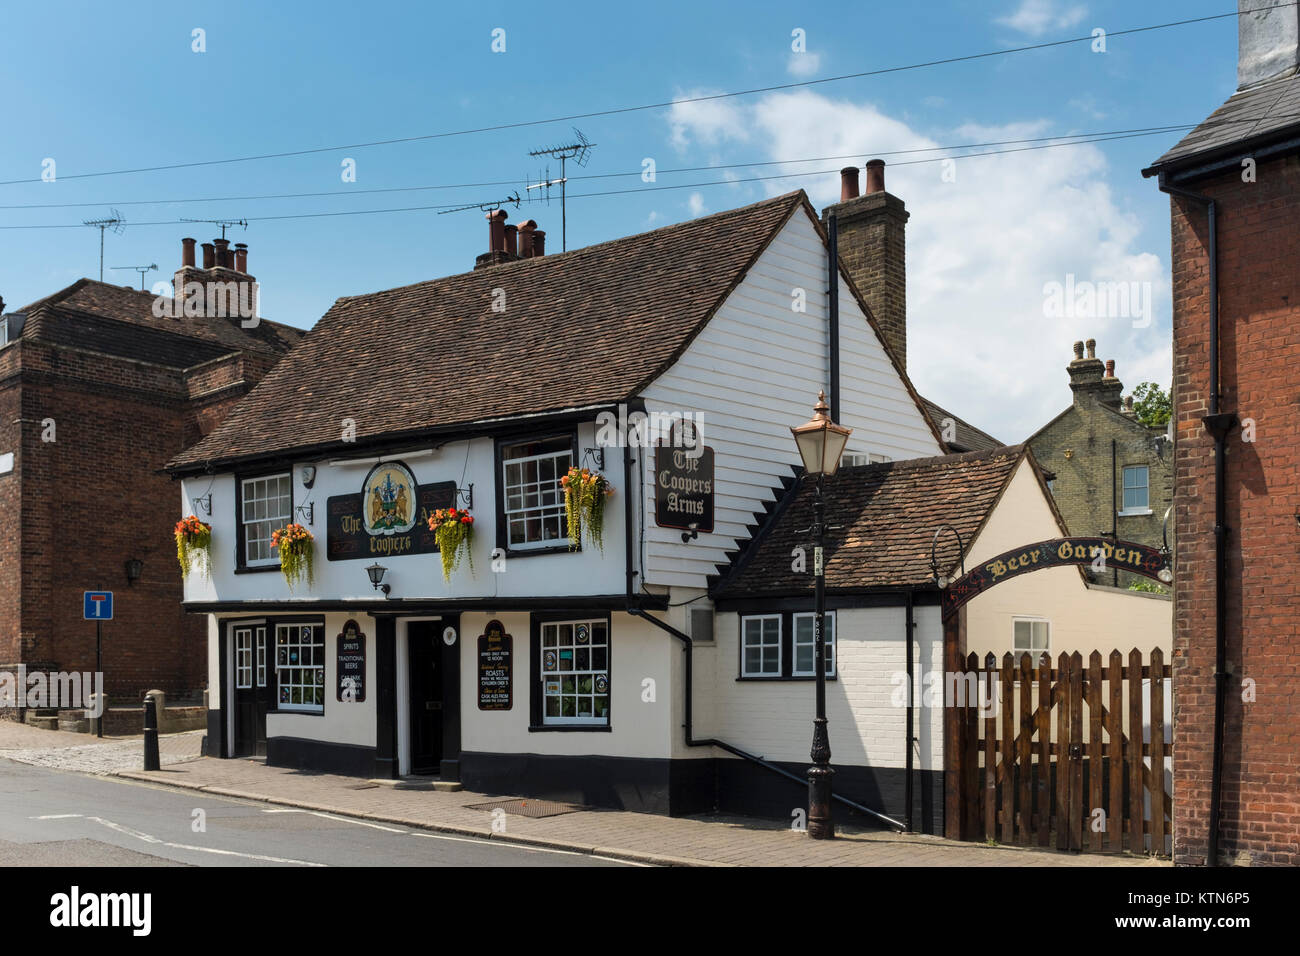 The Coppers Arms English Pub in Rochester, Kent, UK Stock Photo